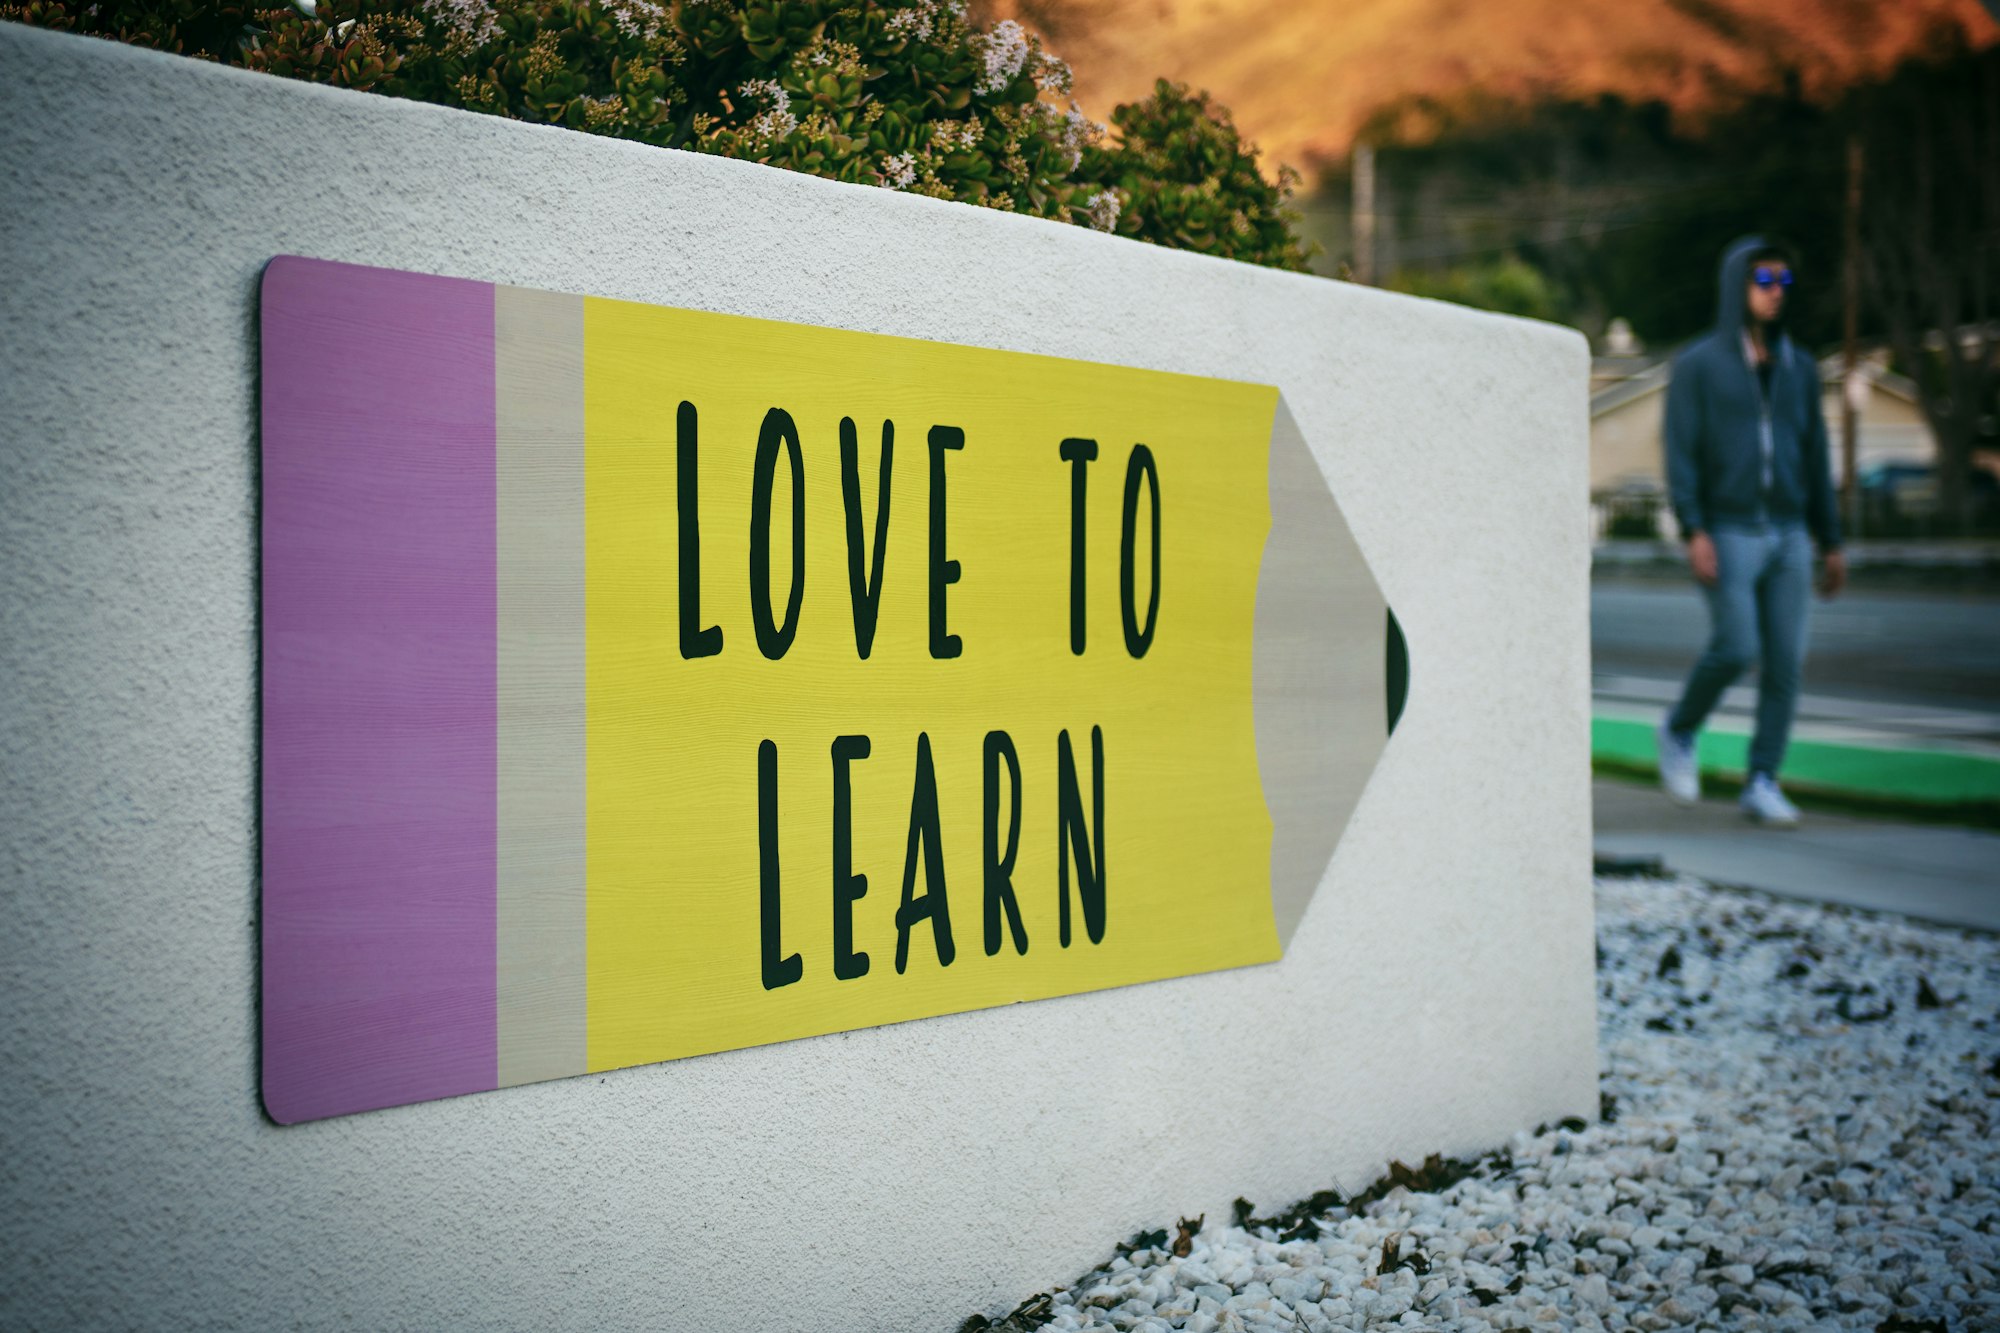 a pencil-shaped diagram reading "love to learn" on a concrete wall